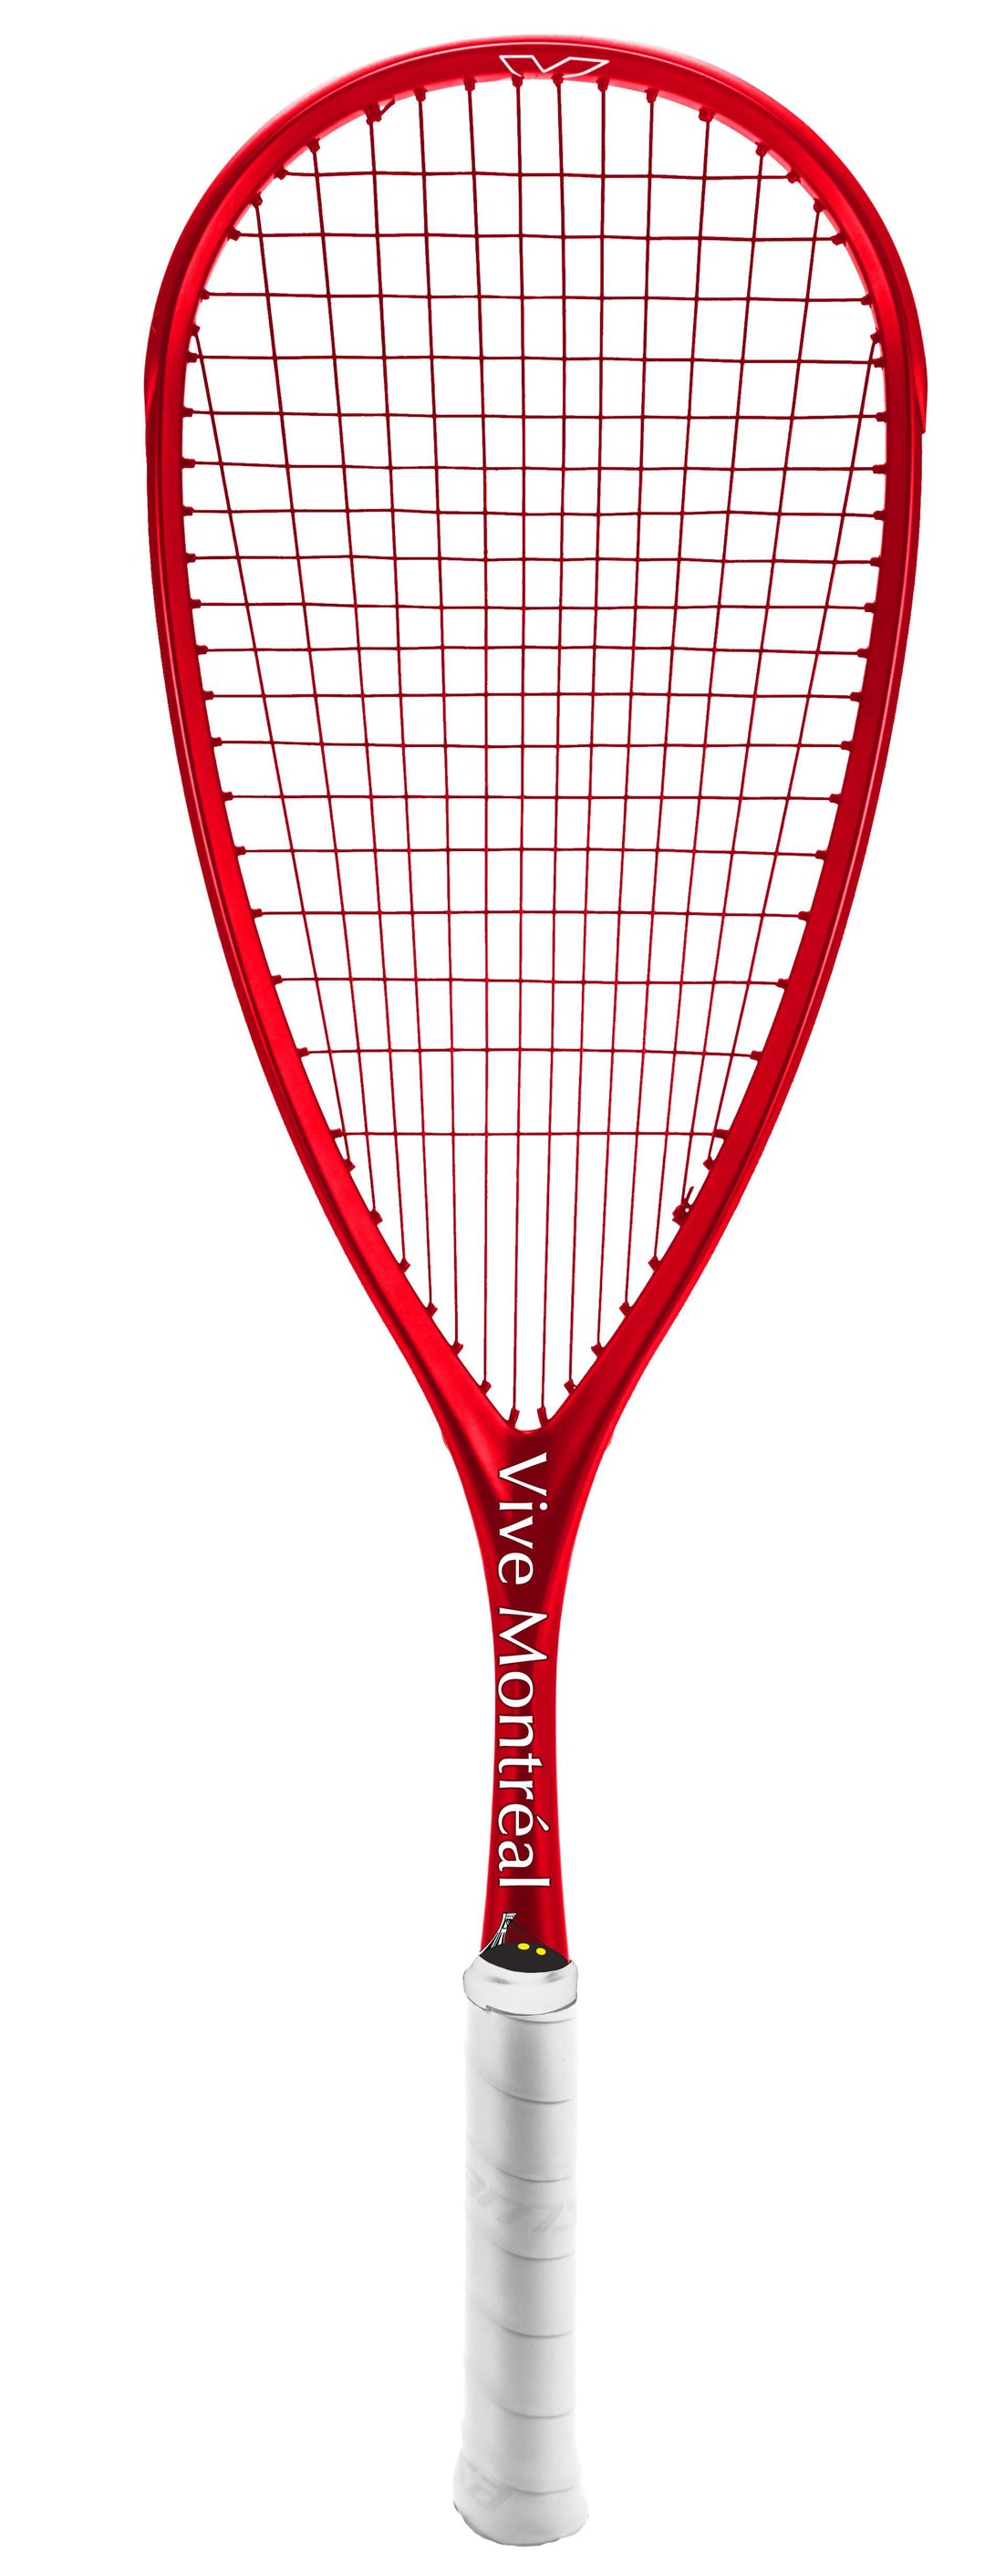 Xamsa Onyx eXposed - Vive Montreal - Limited Edition Squash Racquet Squash Racquets Xamsa Strung with Xamsa PM18 Red with Canada Stencil 